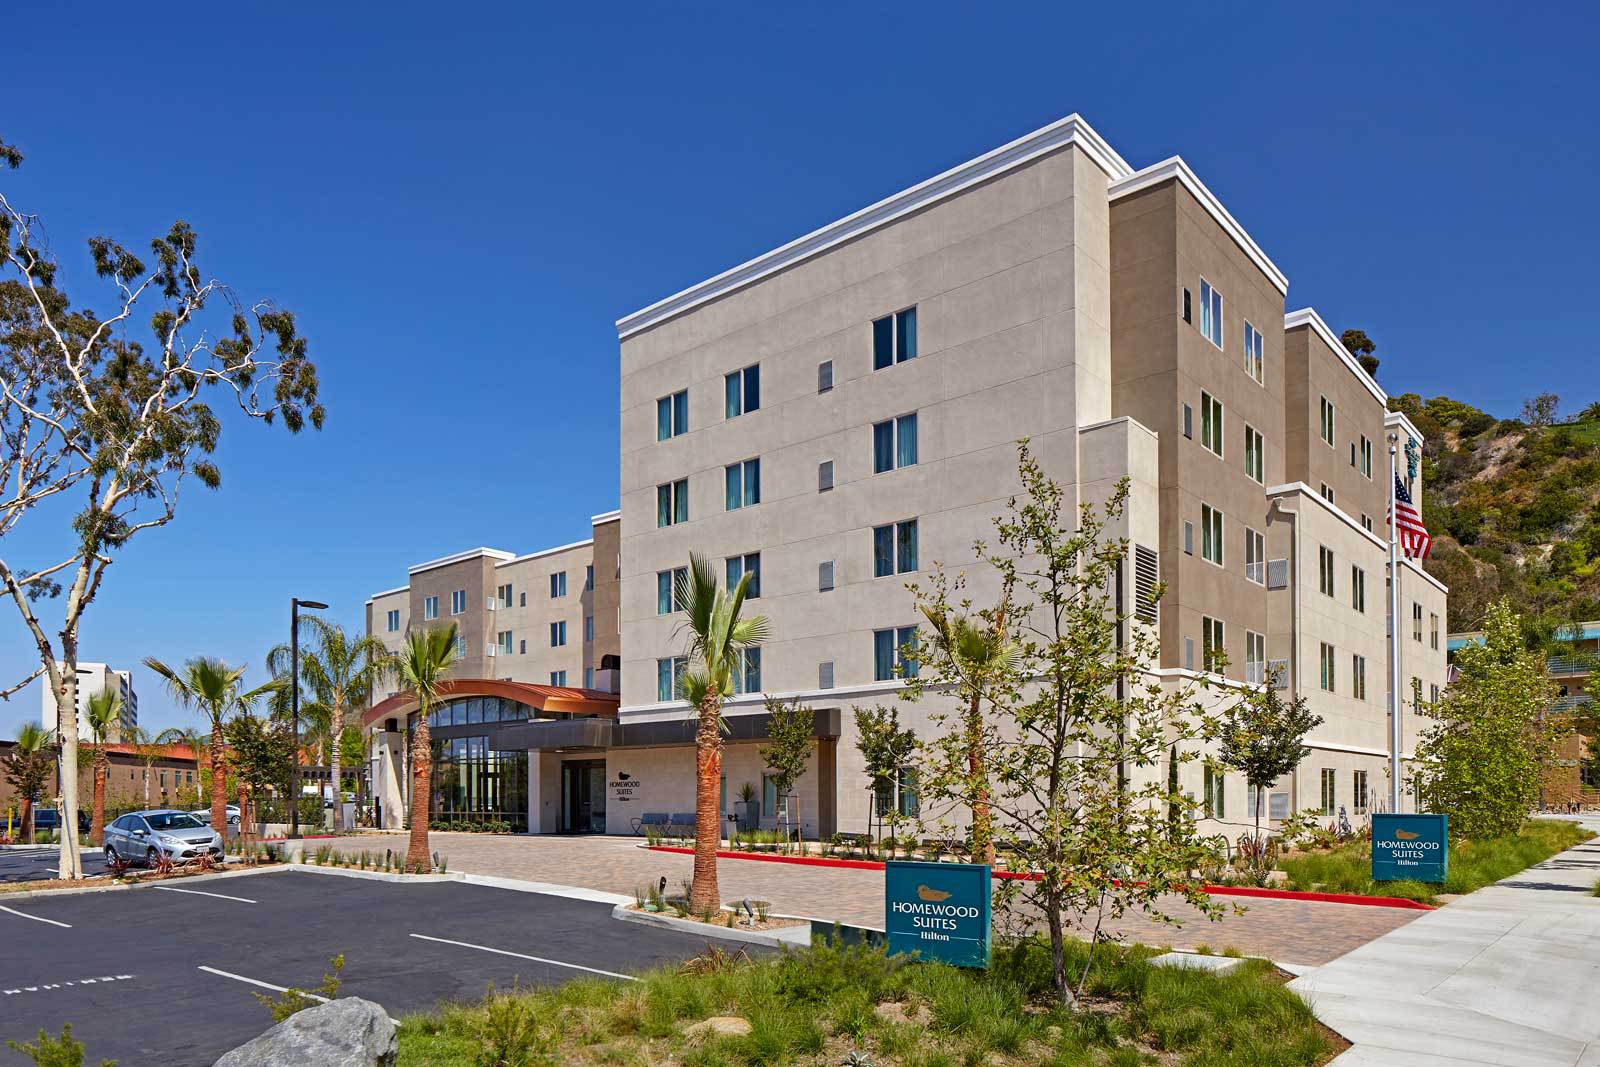 Photo of Homewood Suites by Hilton San Diego Mission Valley/Zoo, San Diego, CA